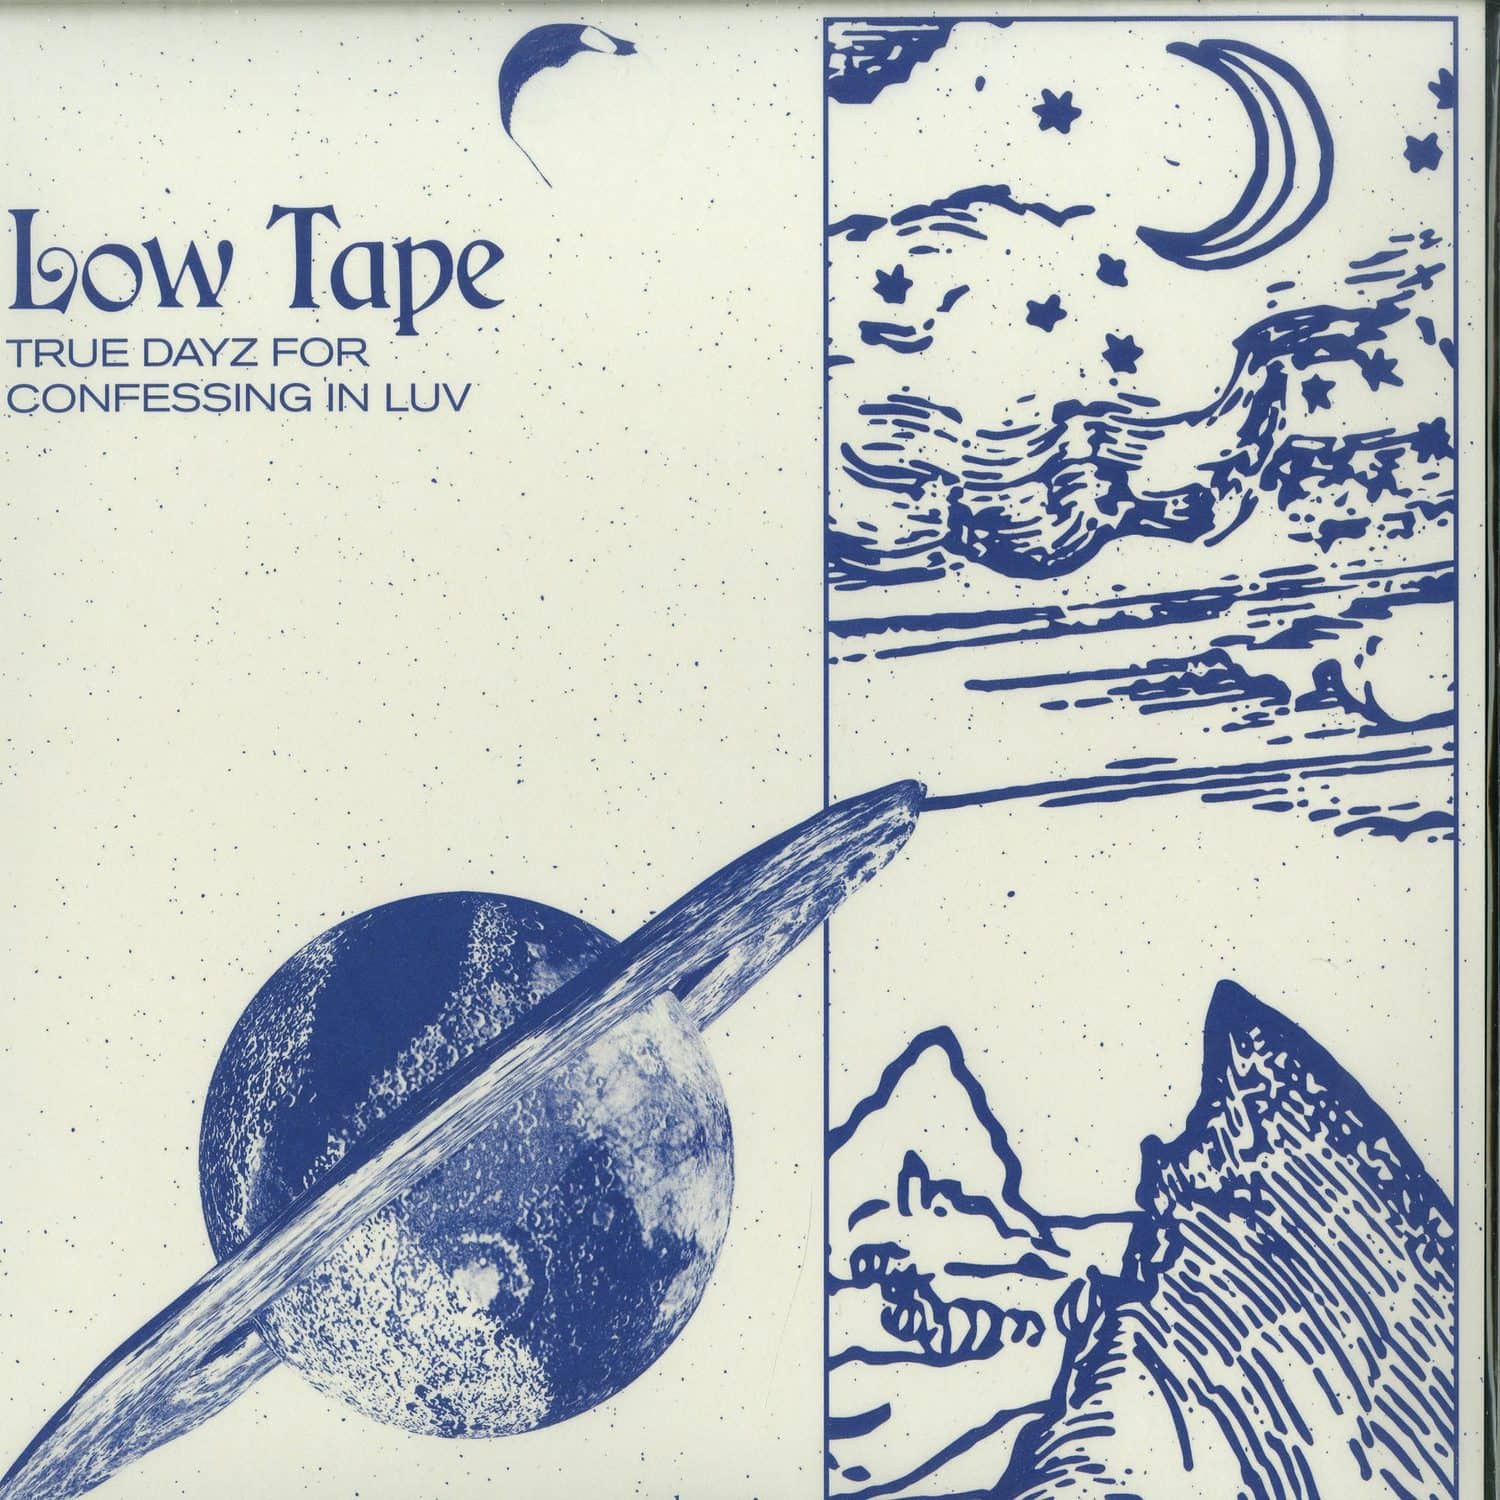 Low Tape - TRUE DAYZ FOR CONFESSING IN LUV